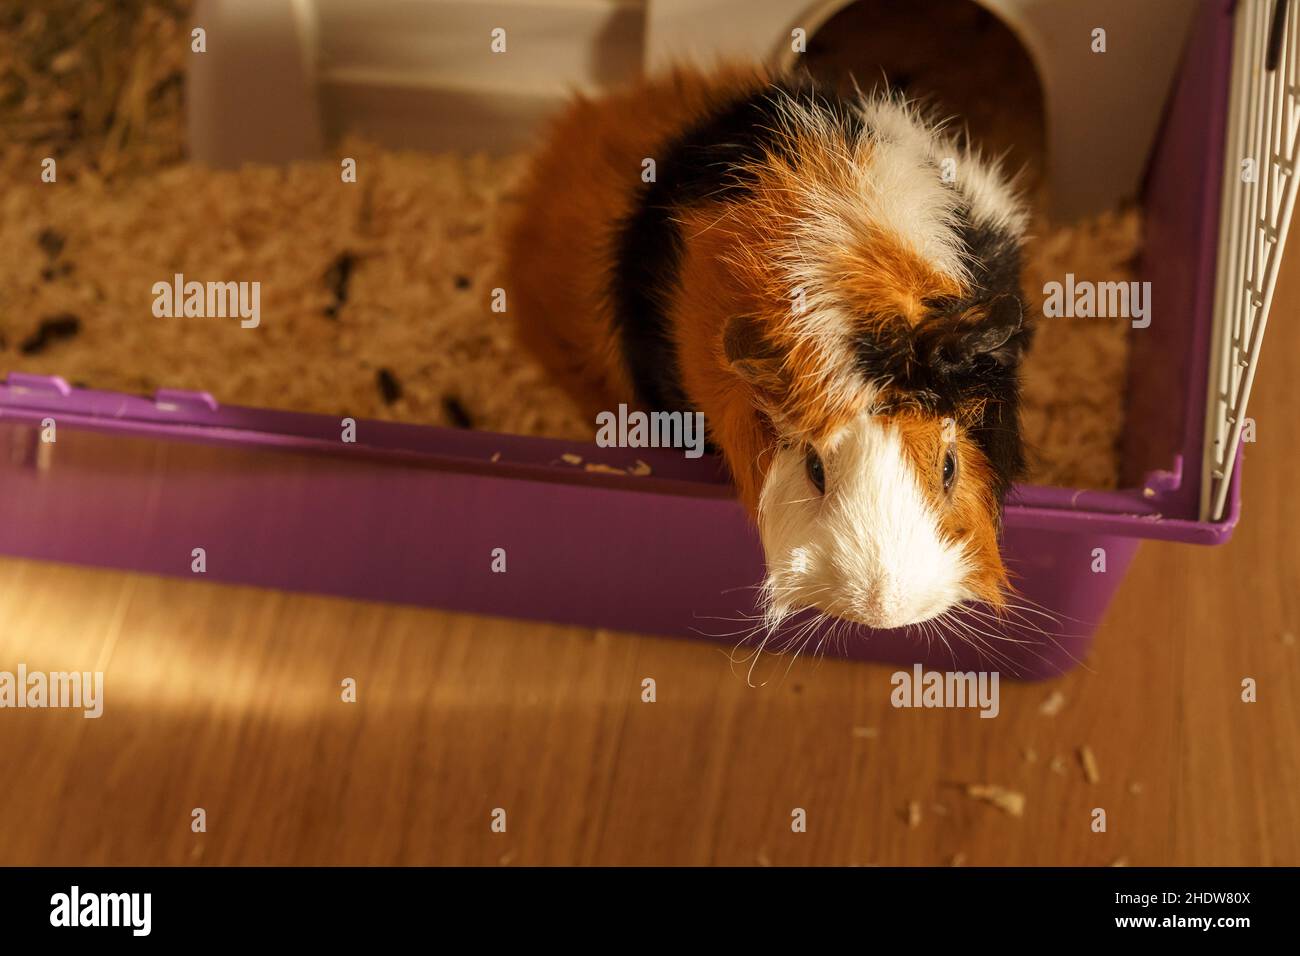 Curious Guinea Pig In Cage. Funny Hairy Guinea Pig Is Coming Out Of Wood Home In Cage. Stock Photo